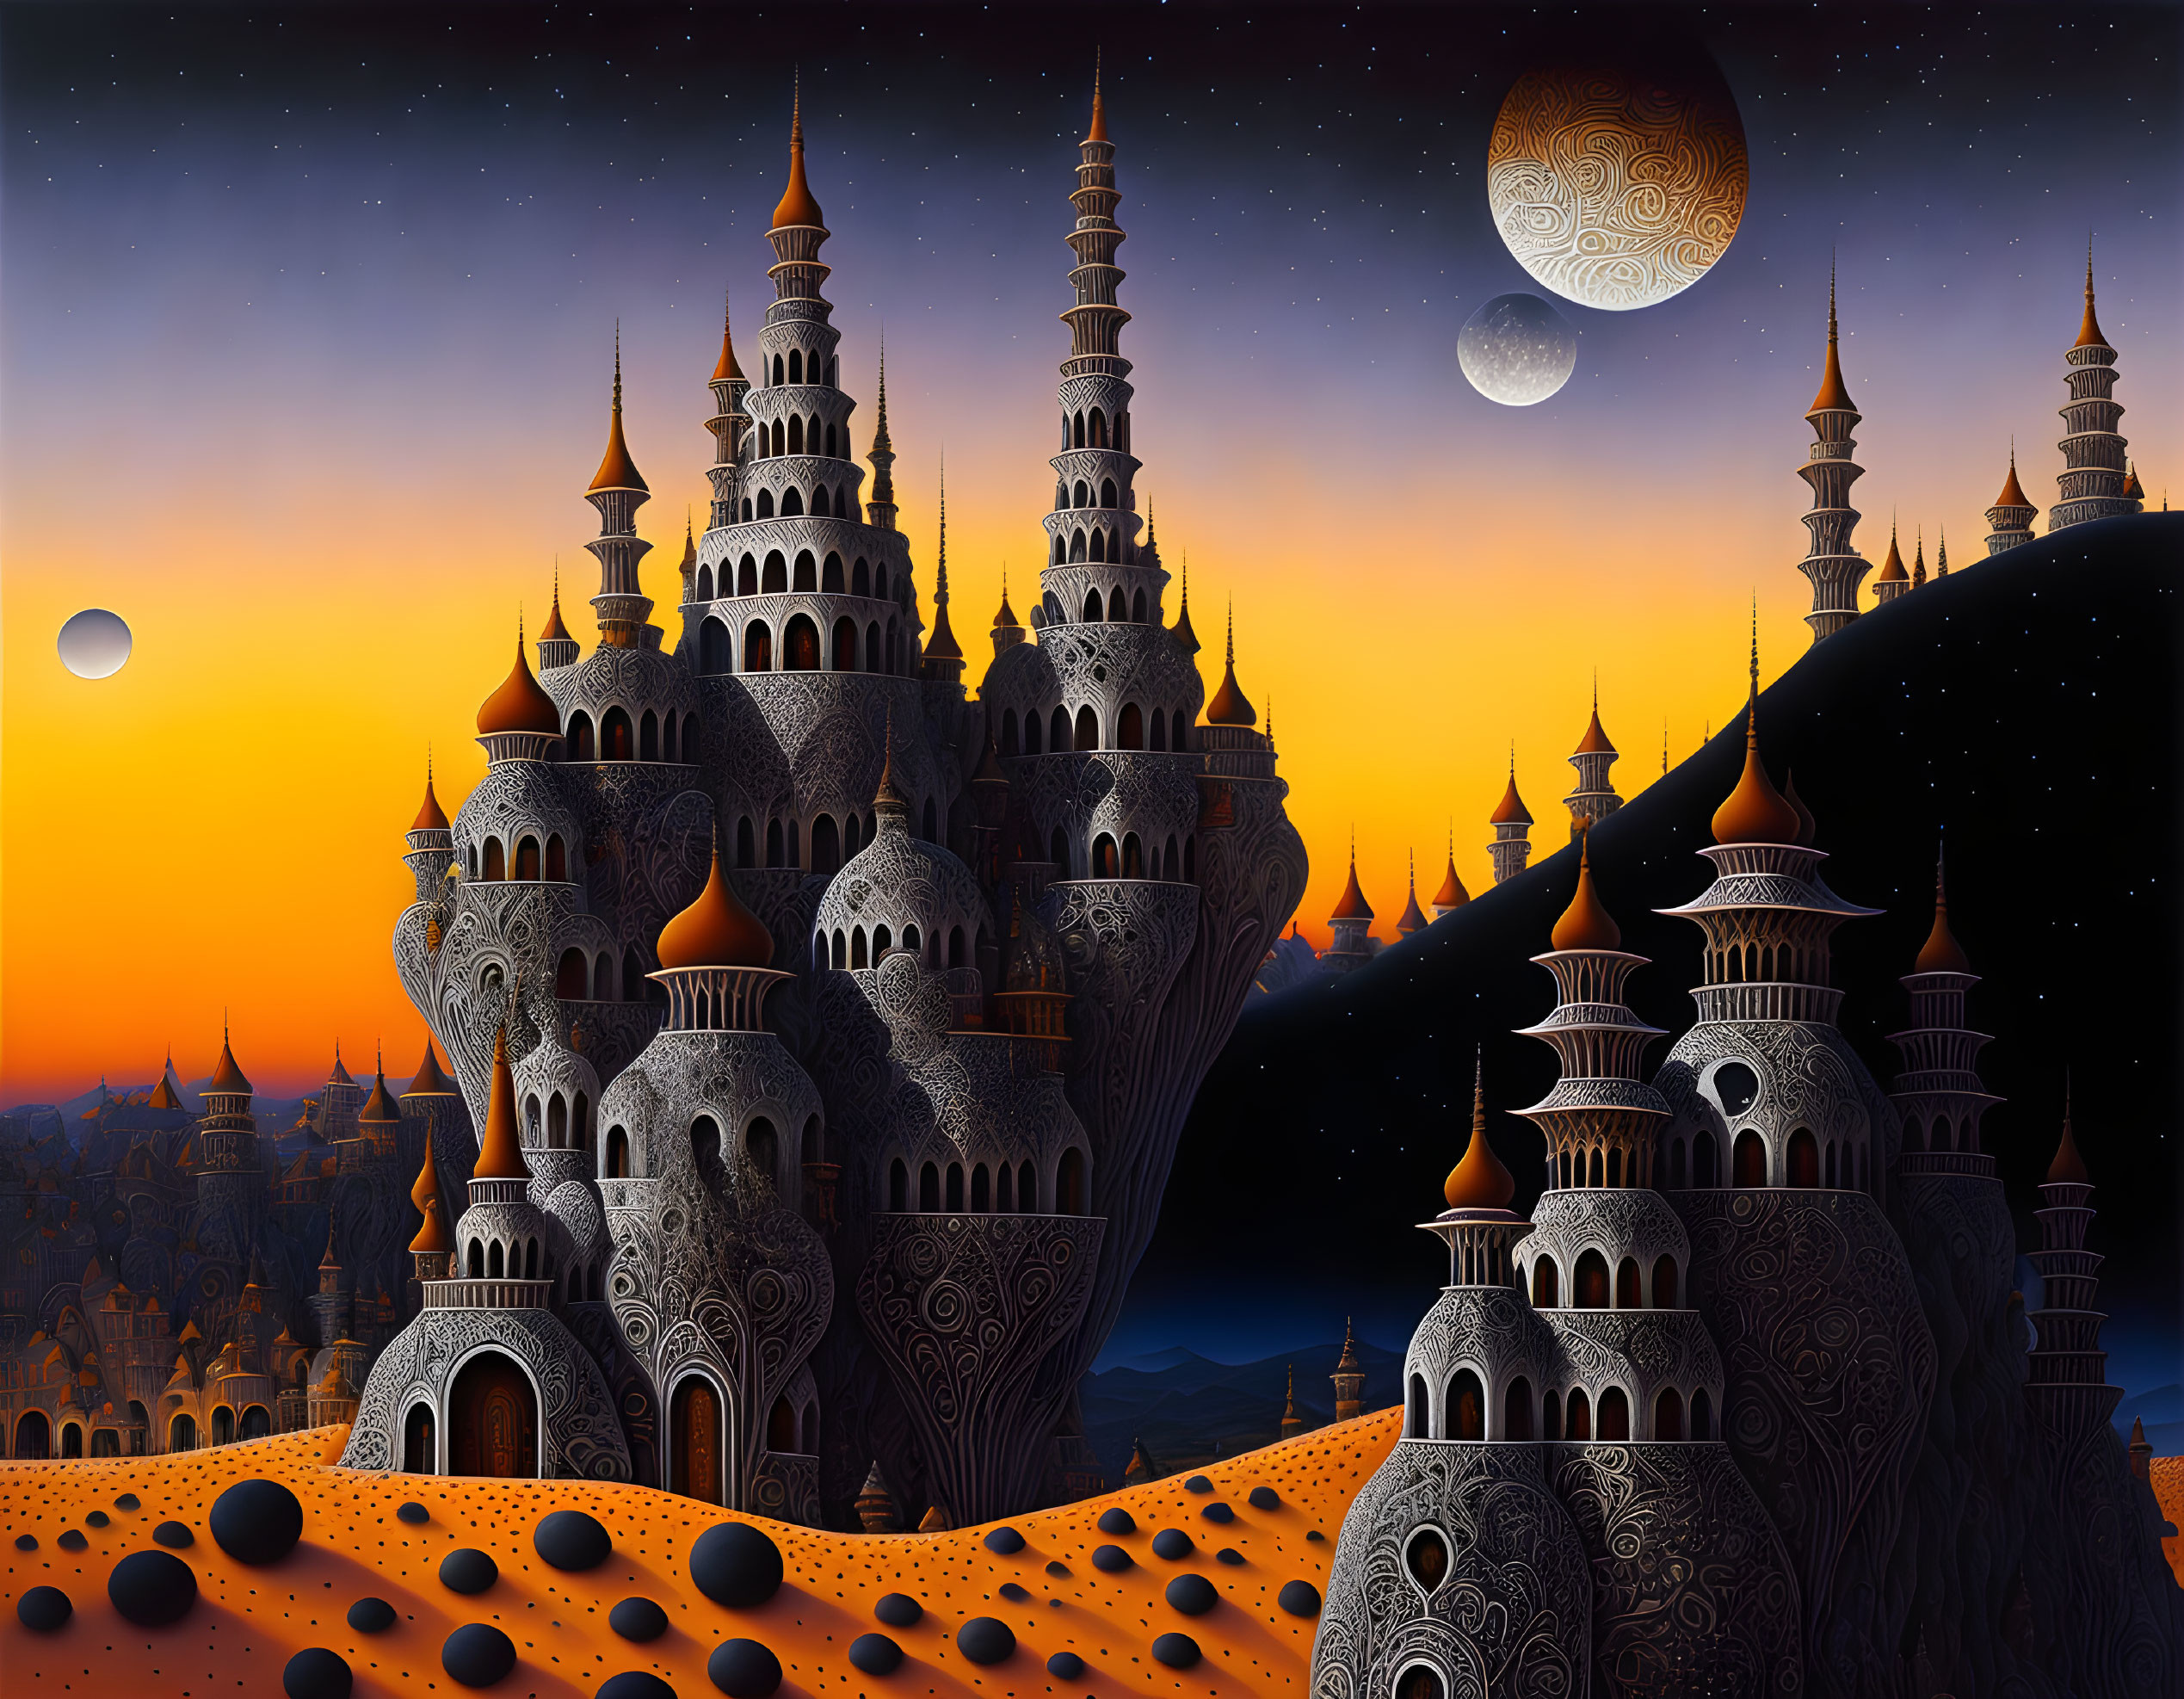 Fantastical night landscape with towers, two moons, and desert spheres